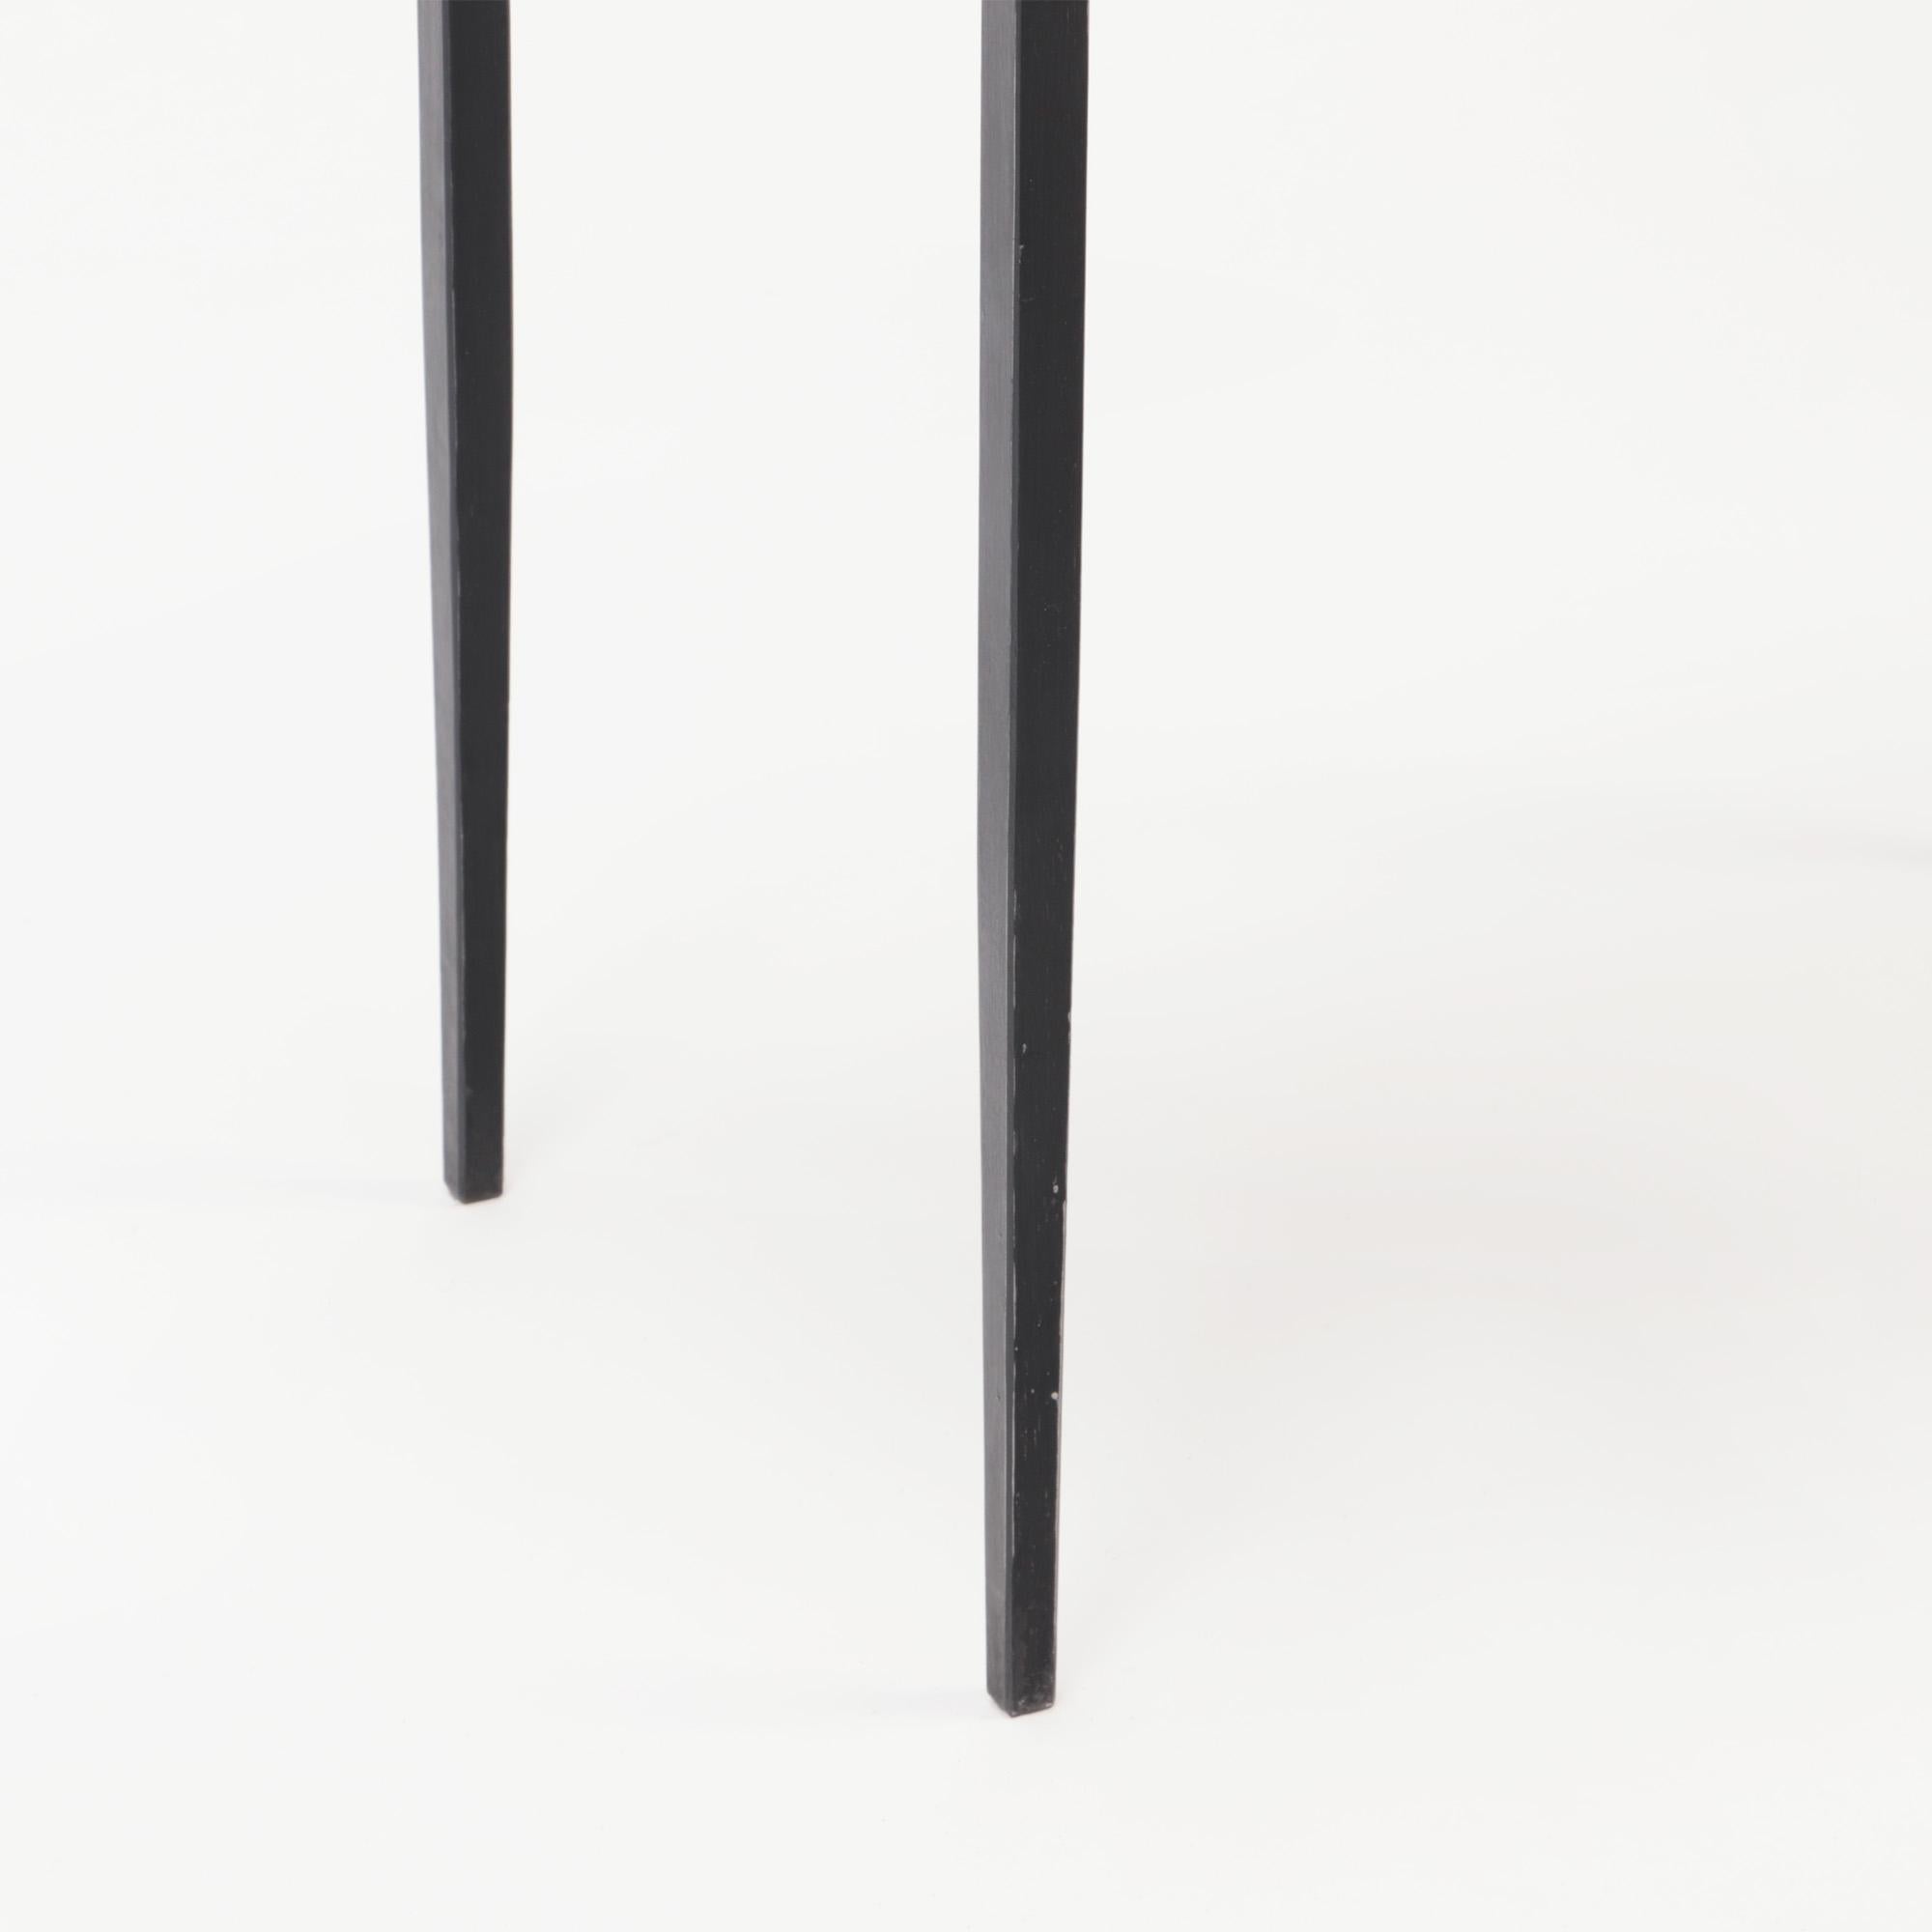 Pair of Iron and Leather Tops Small Console Tables or End Tables, Contemporary 3